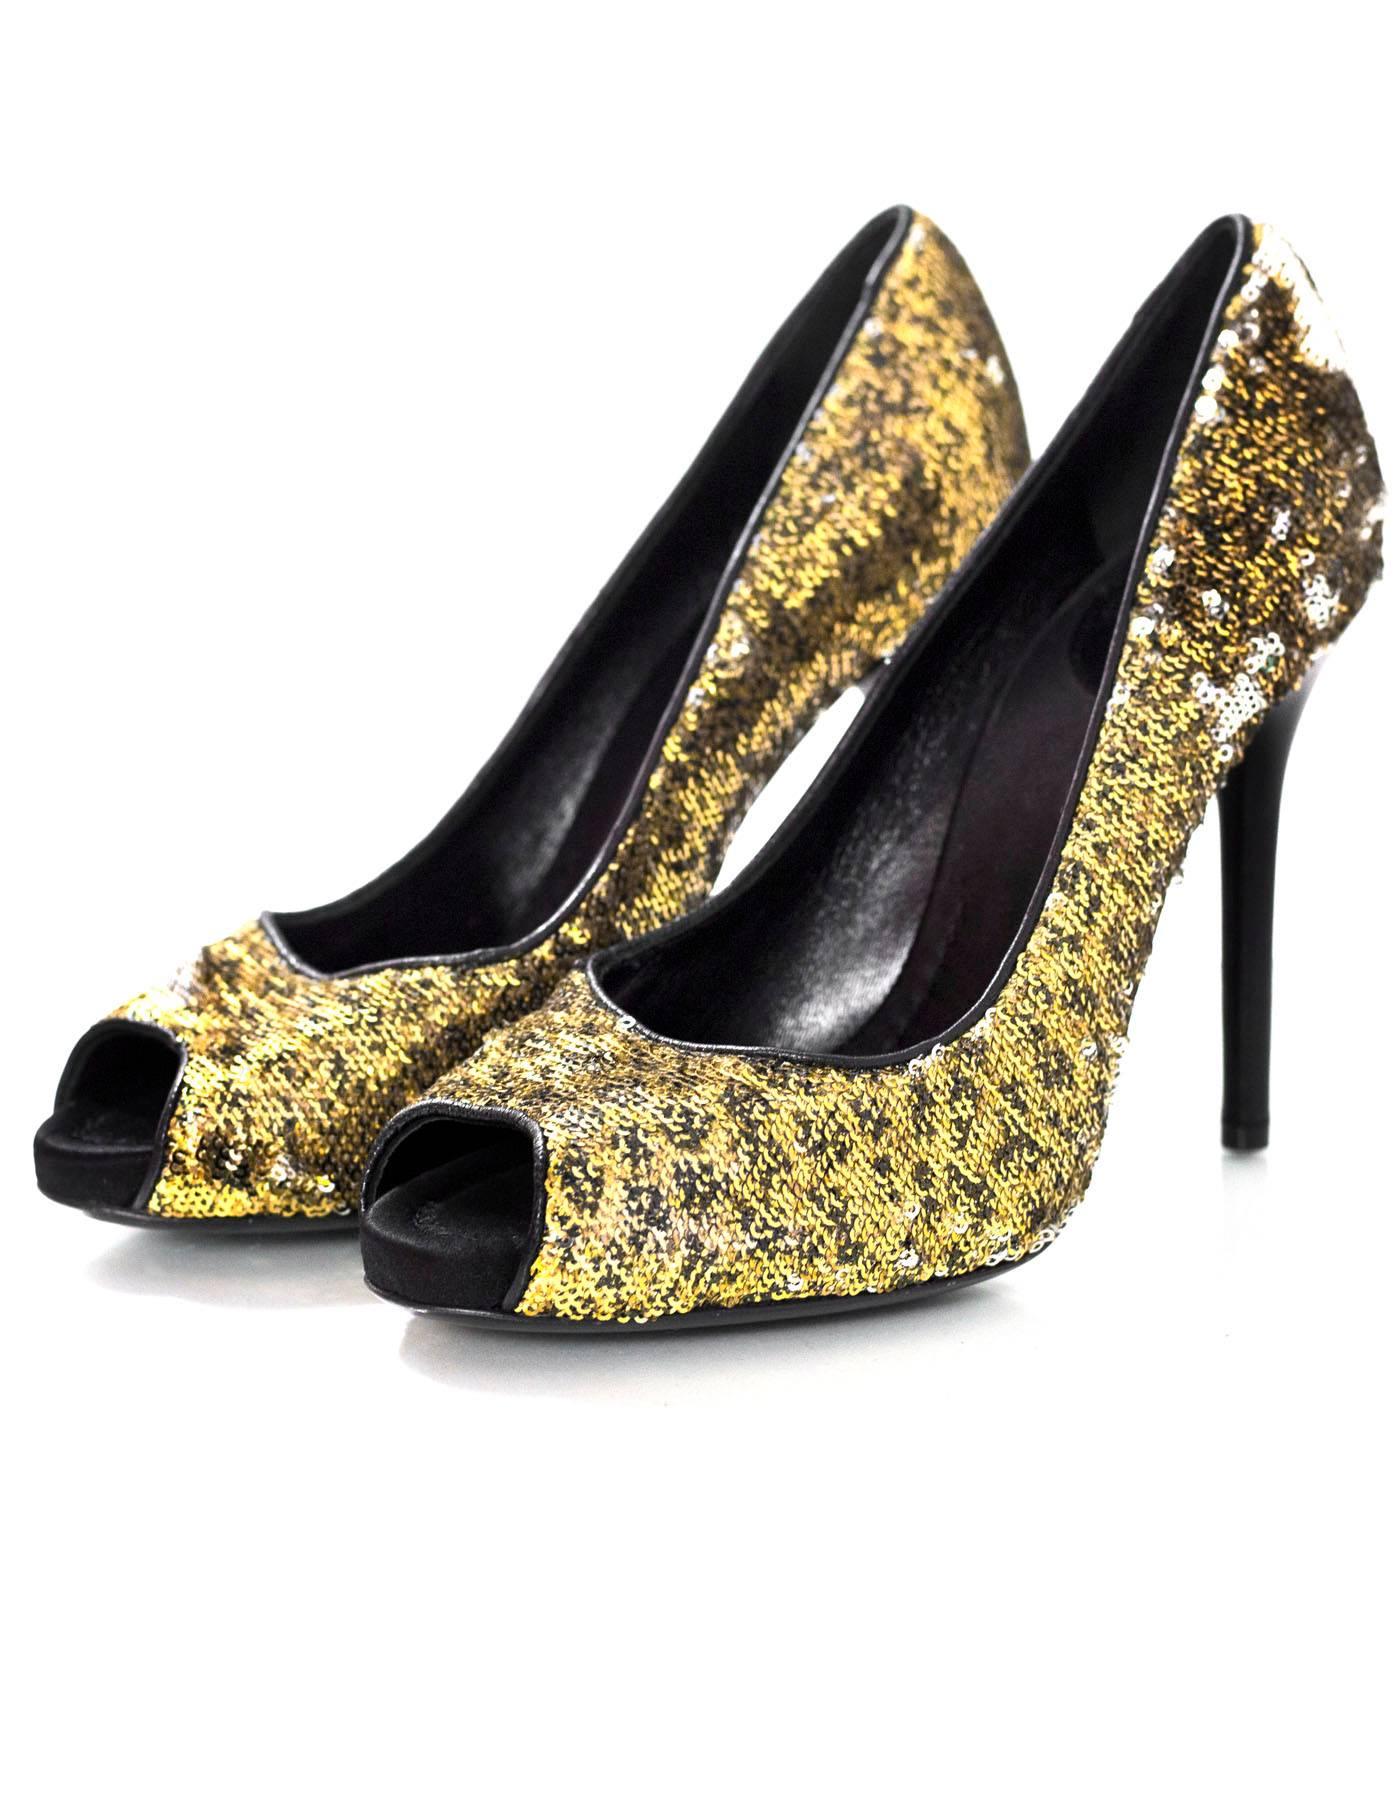 D&G Dolce & Gabbana Gold Sequin Pee-Toe Pumps Sz 38

Made In: Italy
Color: Gold, black
Materials: Sequin
Closure/Opening: Slide on
Sole Stamp: D&G Dolce & Gabbana vero cuoio Made in Italy 38
Overall Condition: Excellent pre-owned